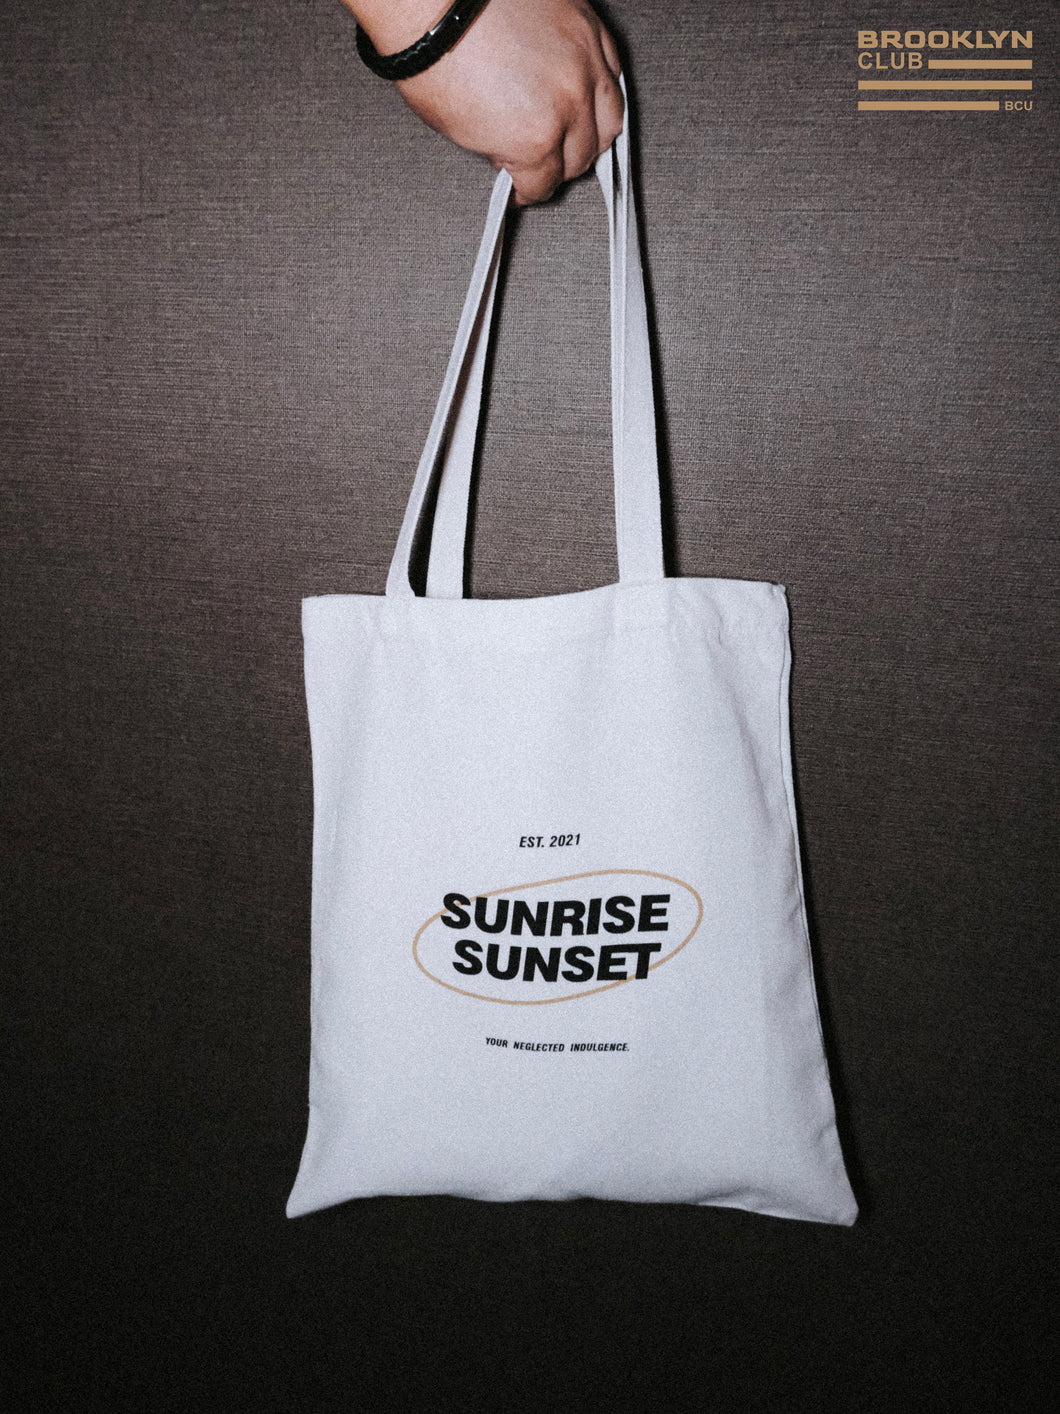 【𝗙𝗥𝗘𝗘 𝗚𝗜𝗙𝗧】 From Sunrise to Sunset Tote Bag *Made in HK*